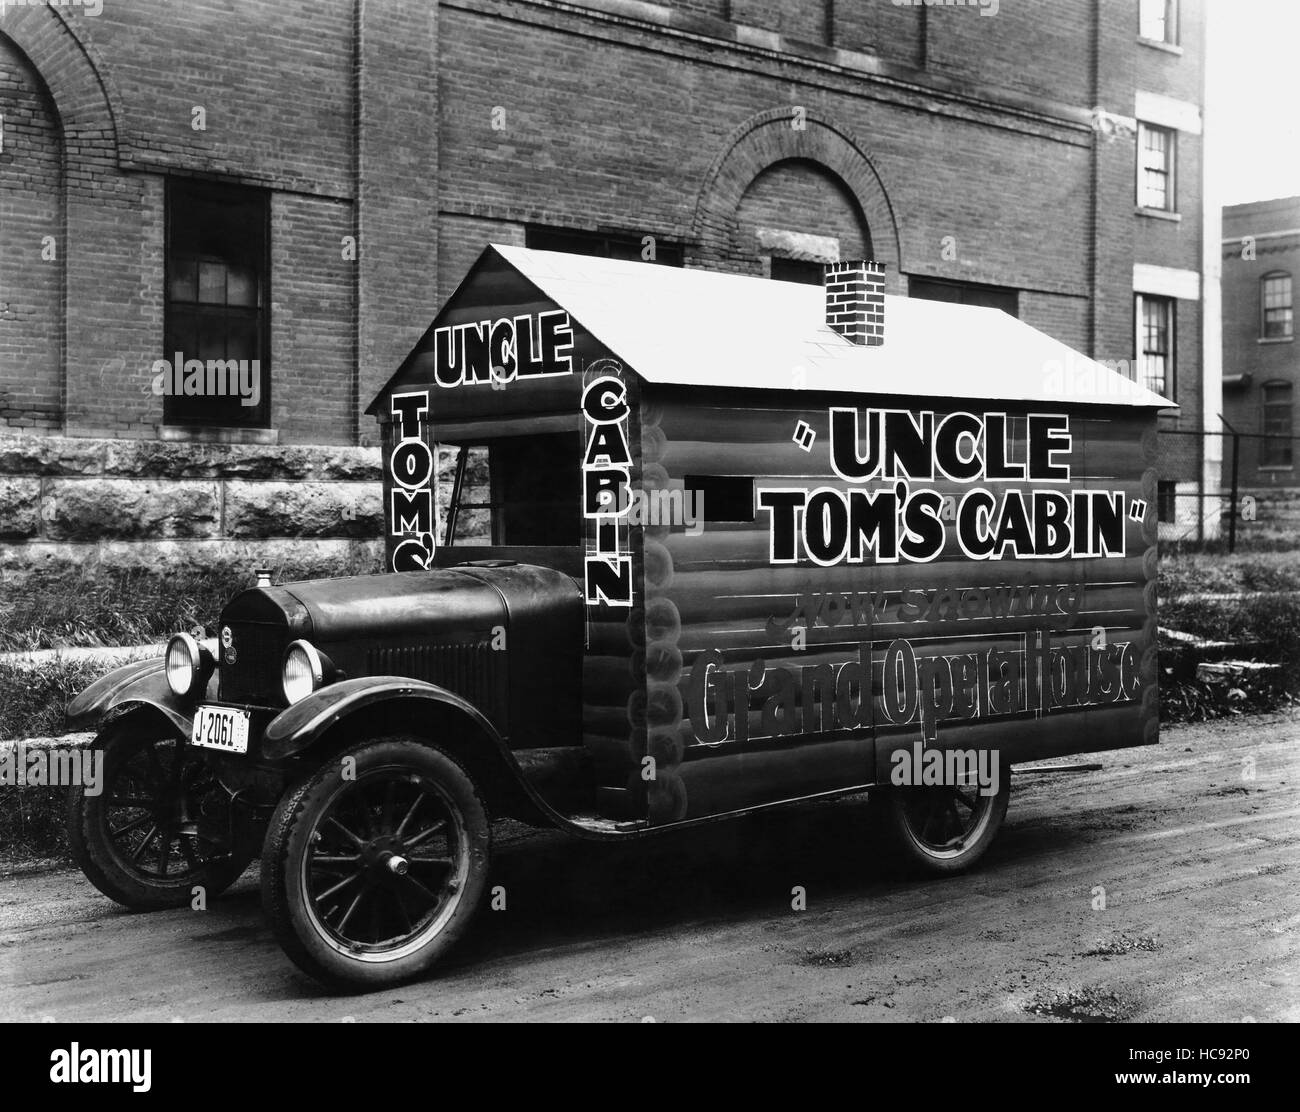 UNCLE TOM'S CABIN, promotional vehicle, 1927 Stock Photo